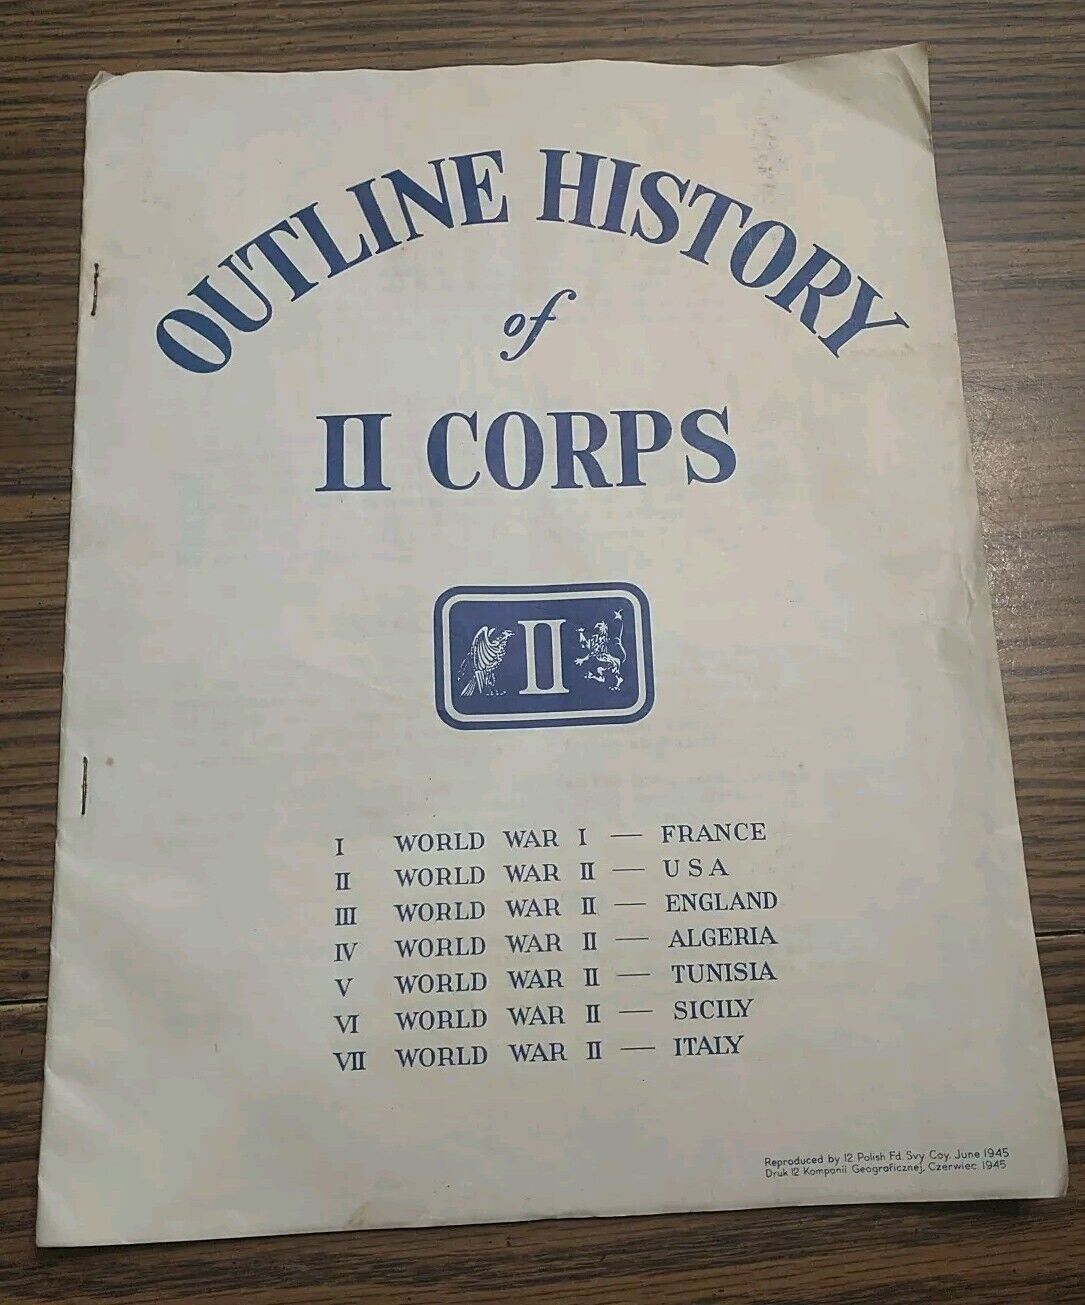 Rare WW2 OUTLINE HISTORY OF II CORPS By 12 Polish Fd Svy Coy June 1945 Booklet 